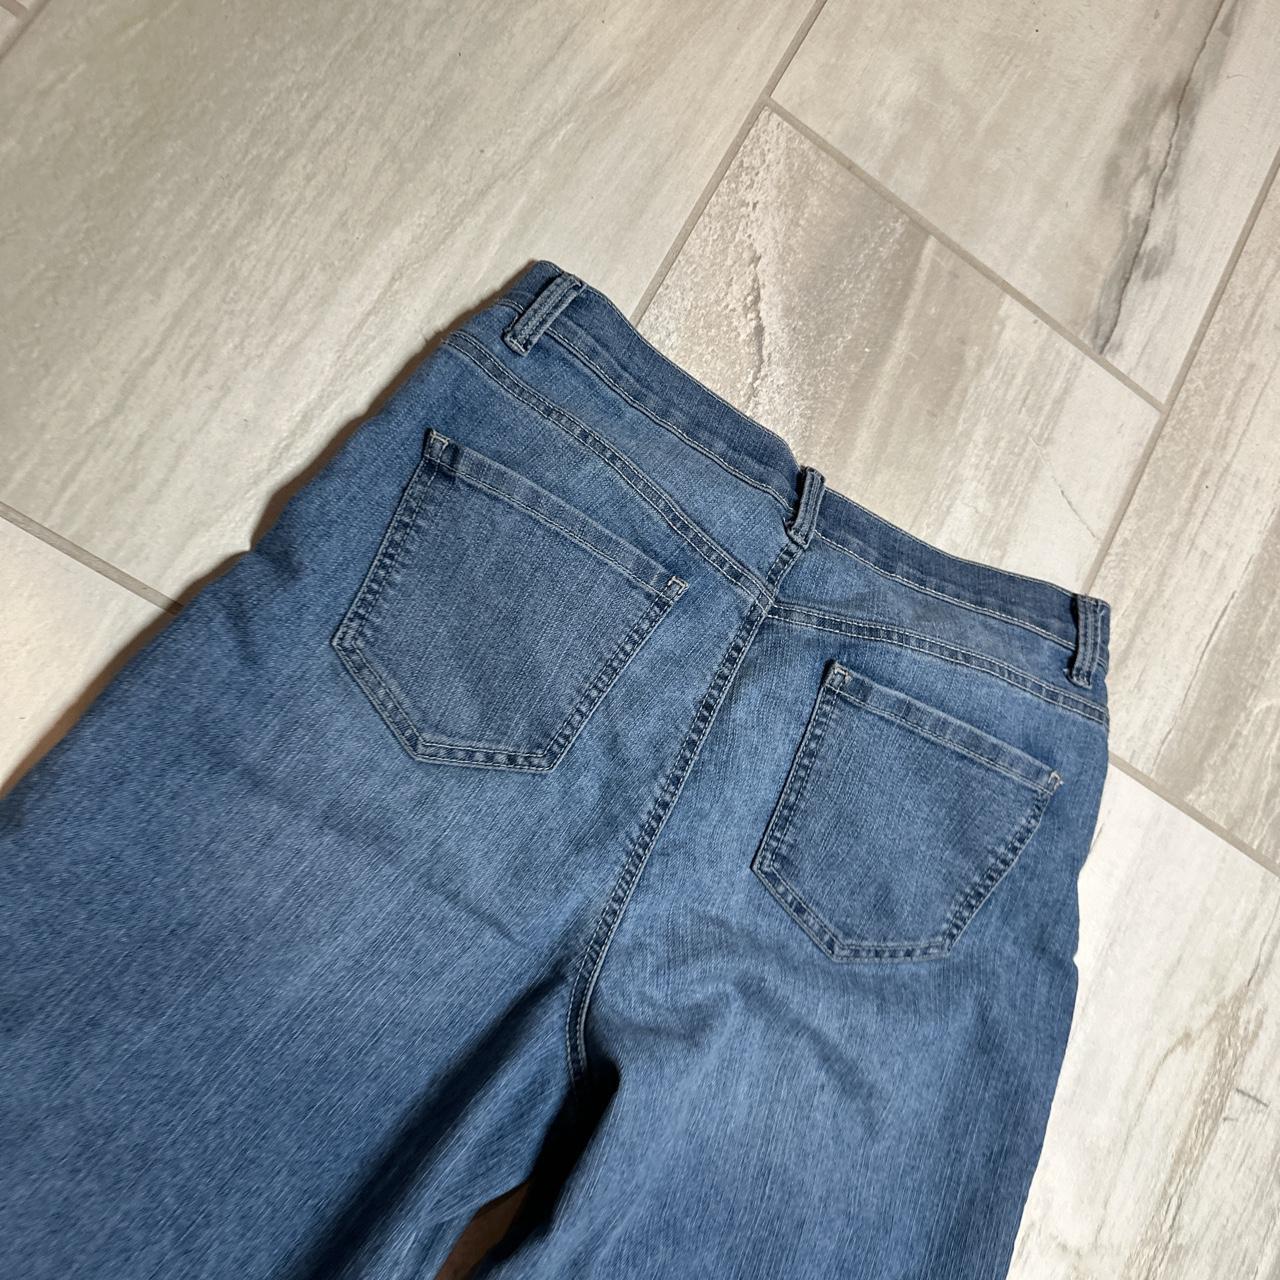 Vintage baggy jnco styled jeans Size 32 waist... - Depop